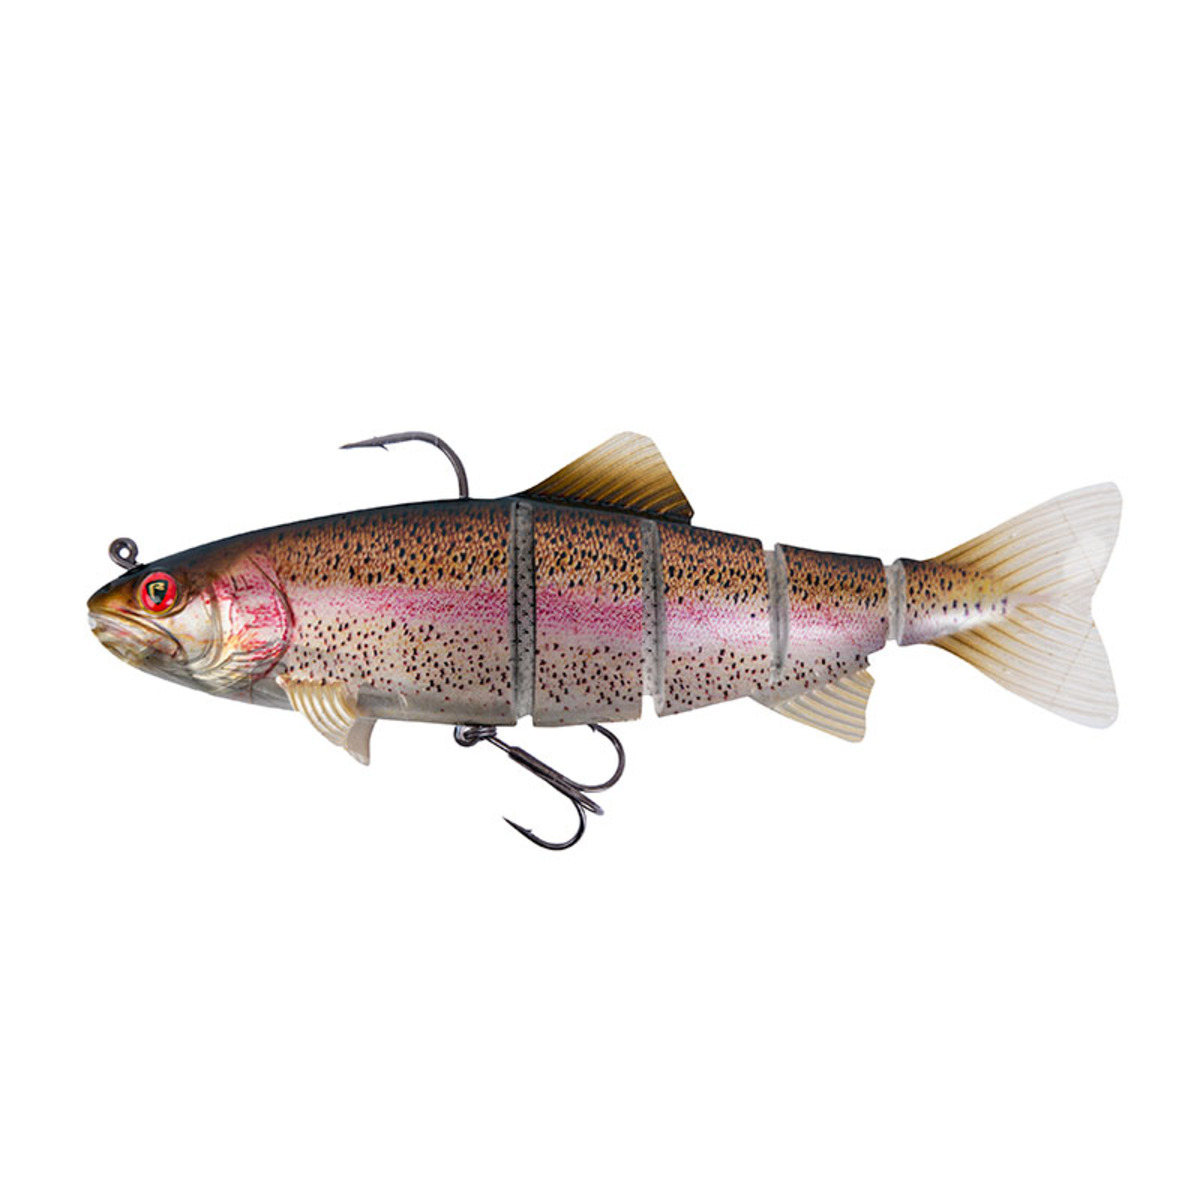 Fox Rage Realistic Replicant Trout Jointed 23 Cm 9" - Supernatural Rainbow Trout